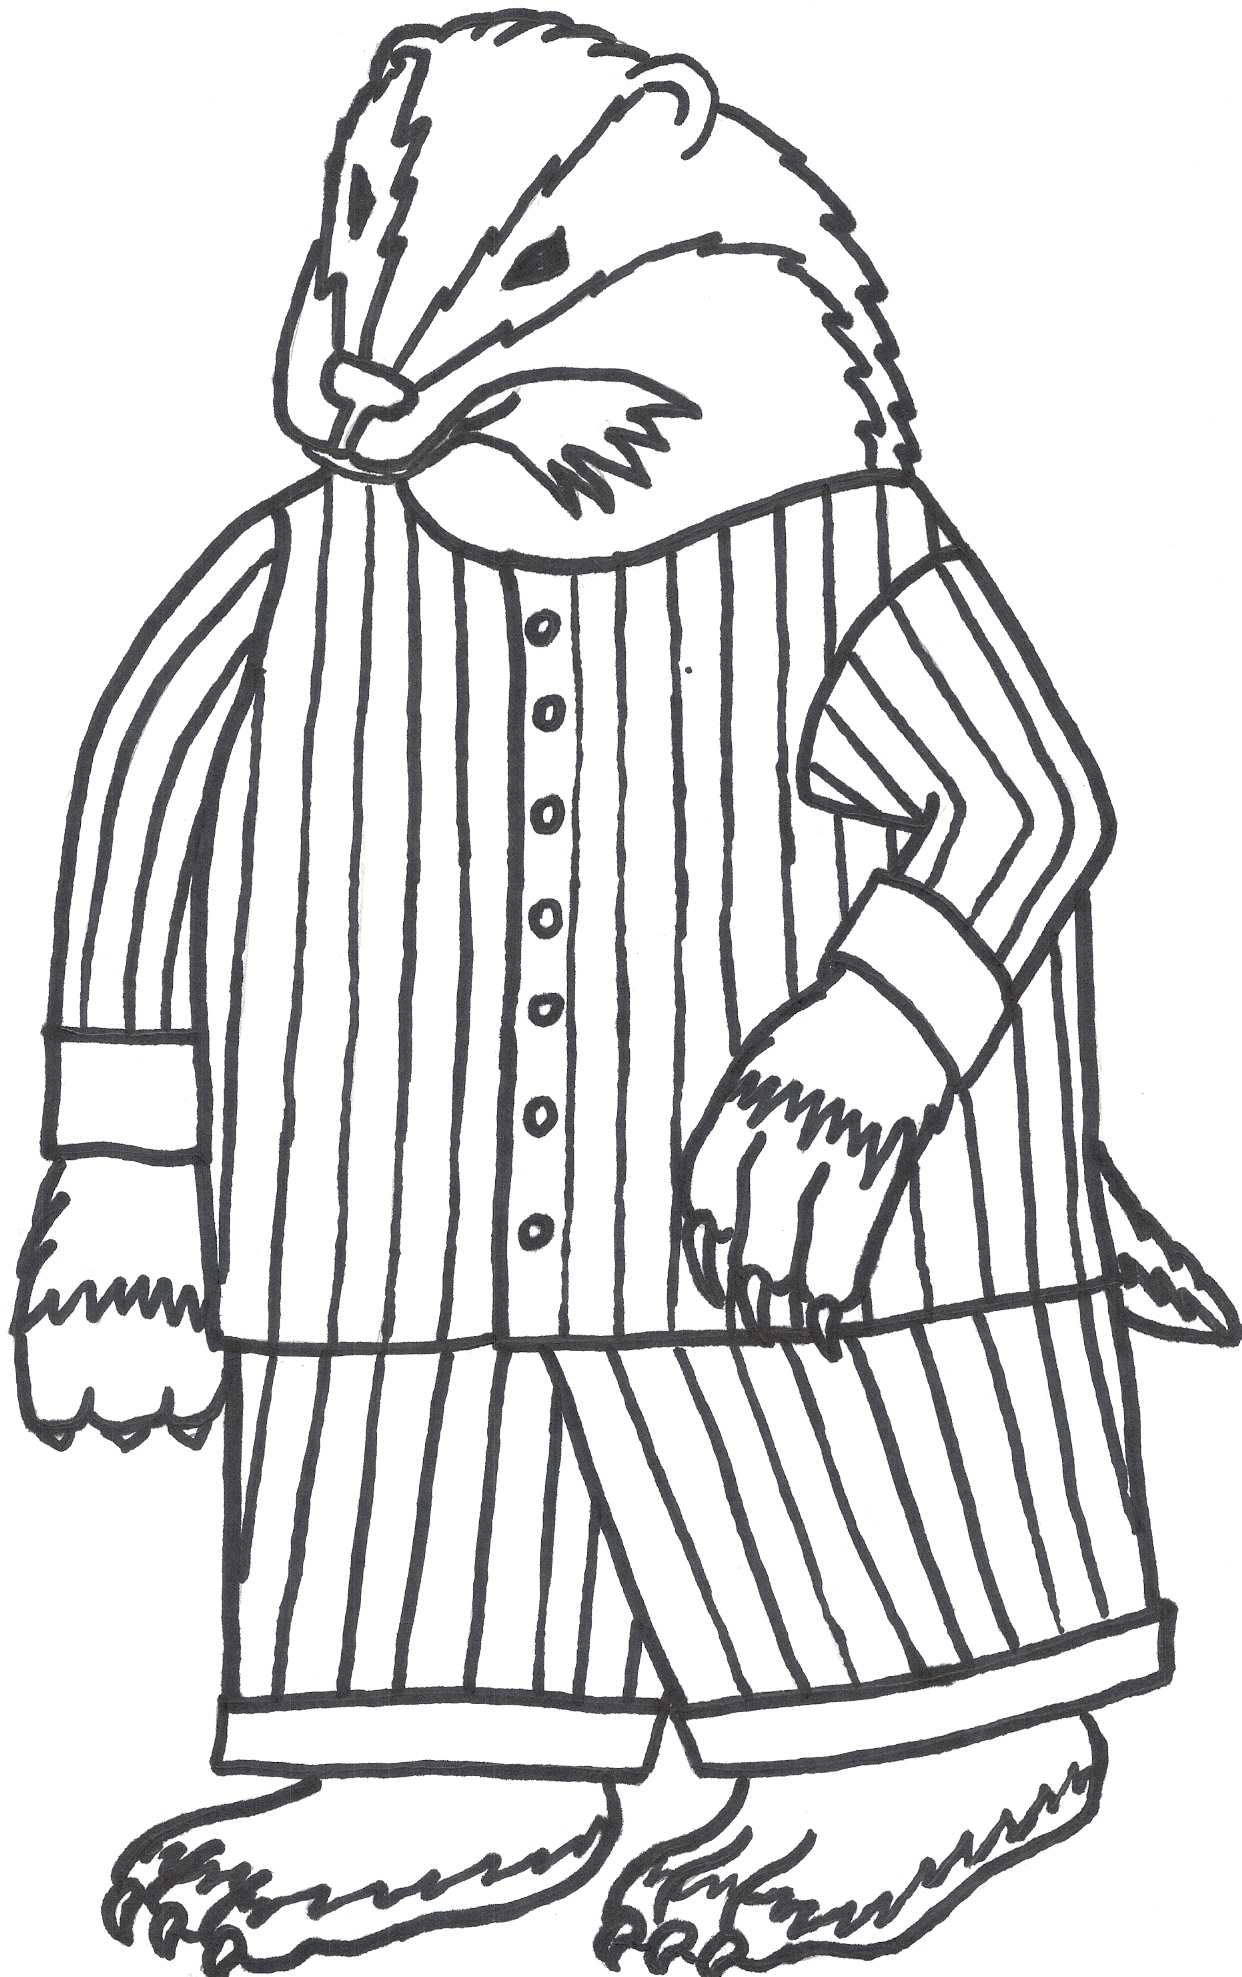 Wisconsin Badgers Coloring Pages at GetColorings.com | Free printable